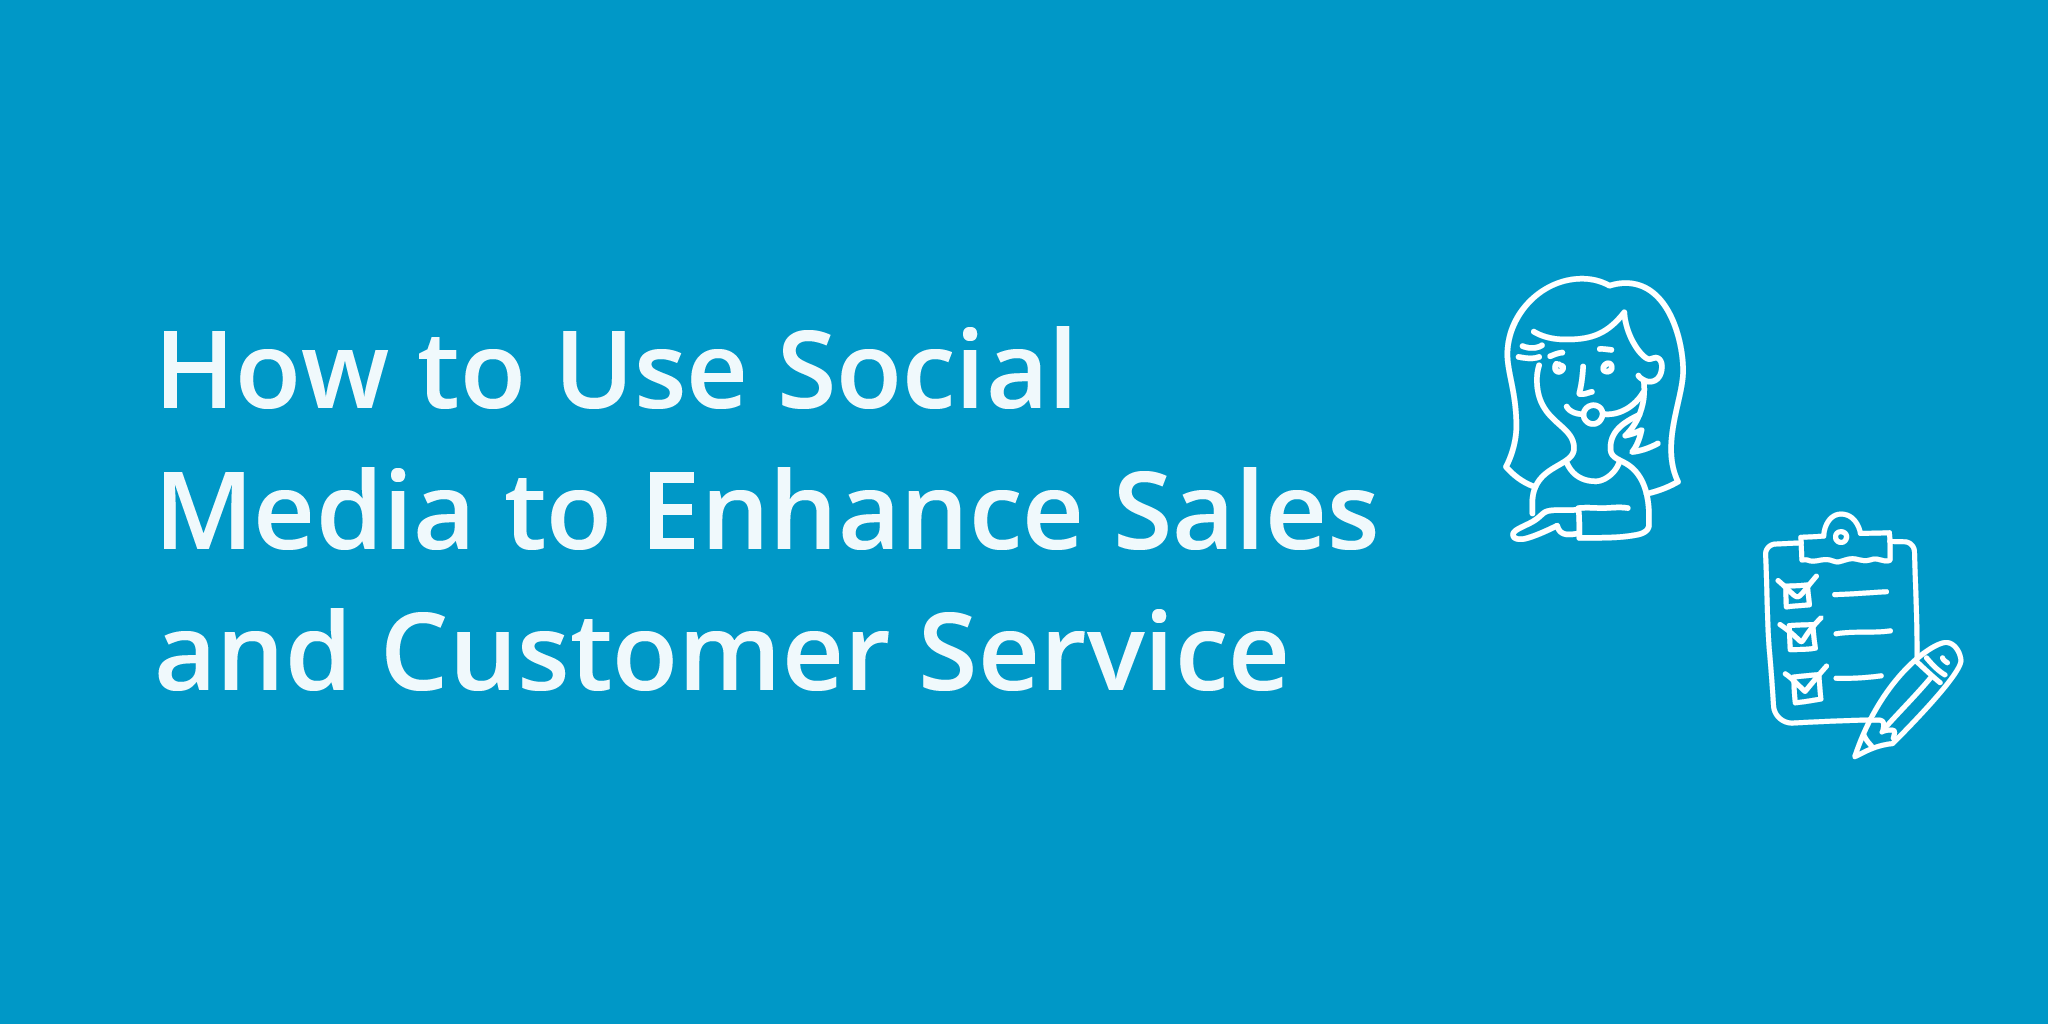 Maximize Sales and Customer Service With These Social Media Strategies